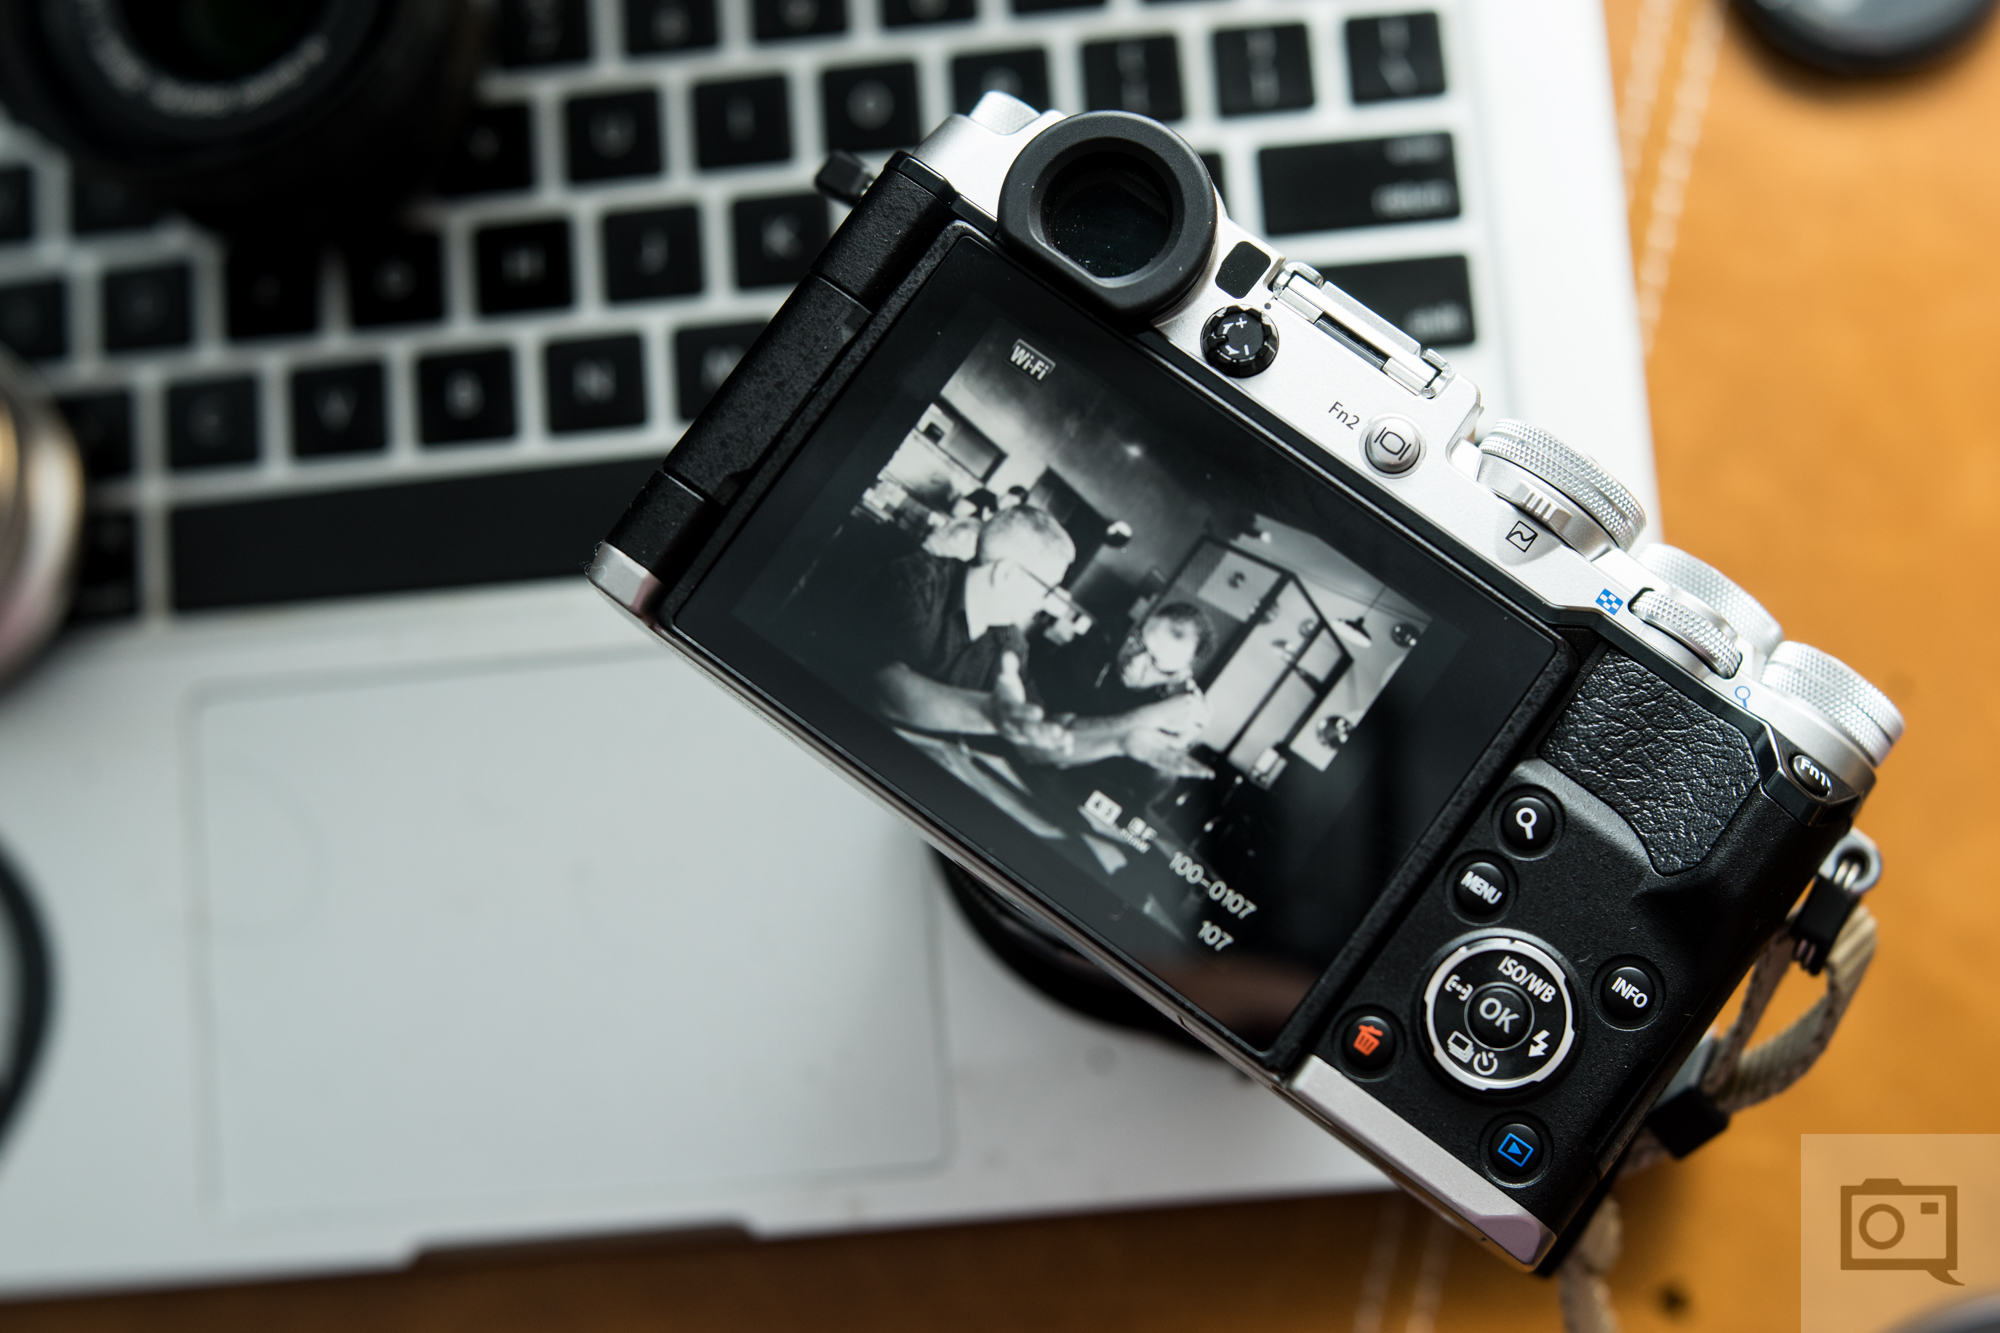 Hands-on: The Olympus PEN-F is about more than its retro good looks